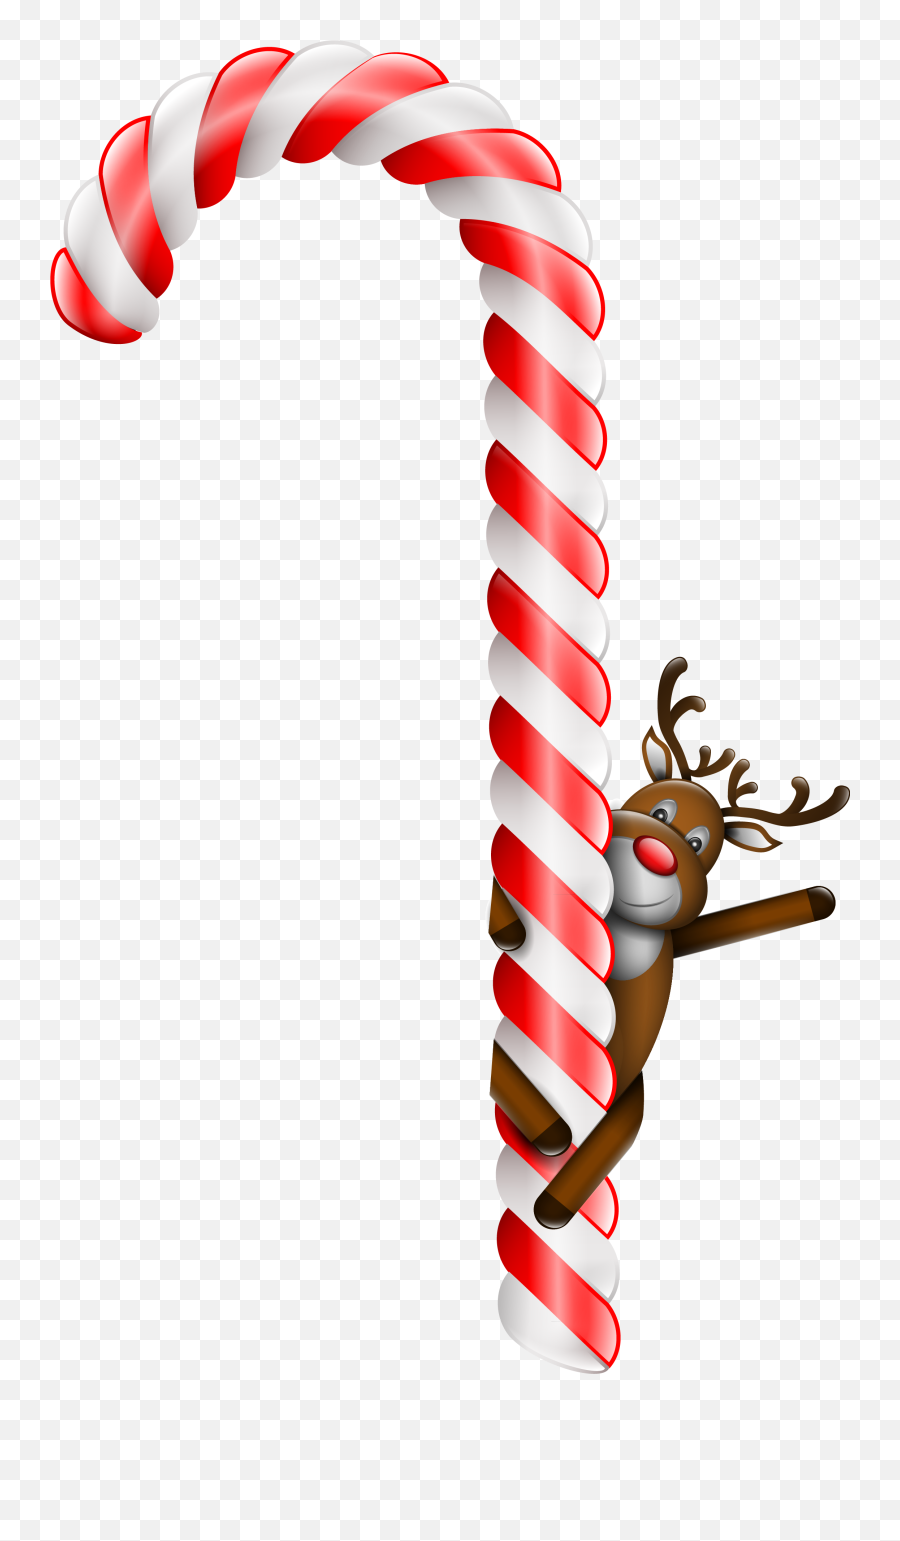 Free Candy Cane Clipart Transparent Background Download - Lollipop Cane Christmas Emoji,Christmas Candy Clipart